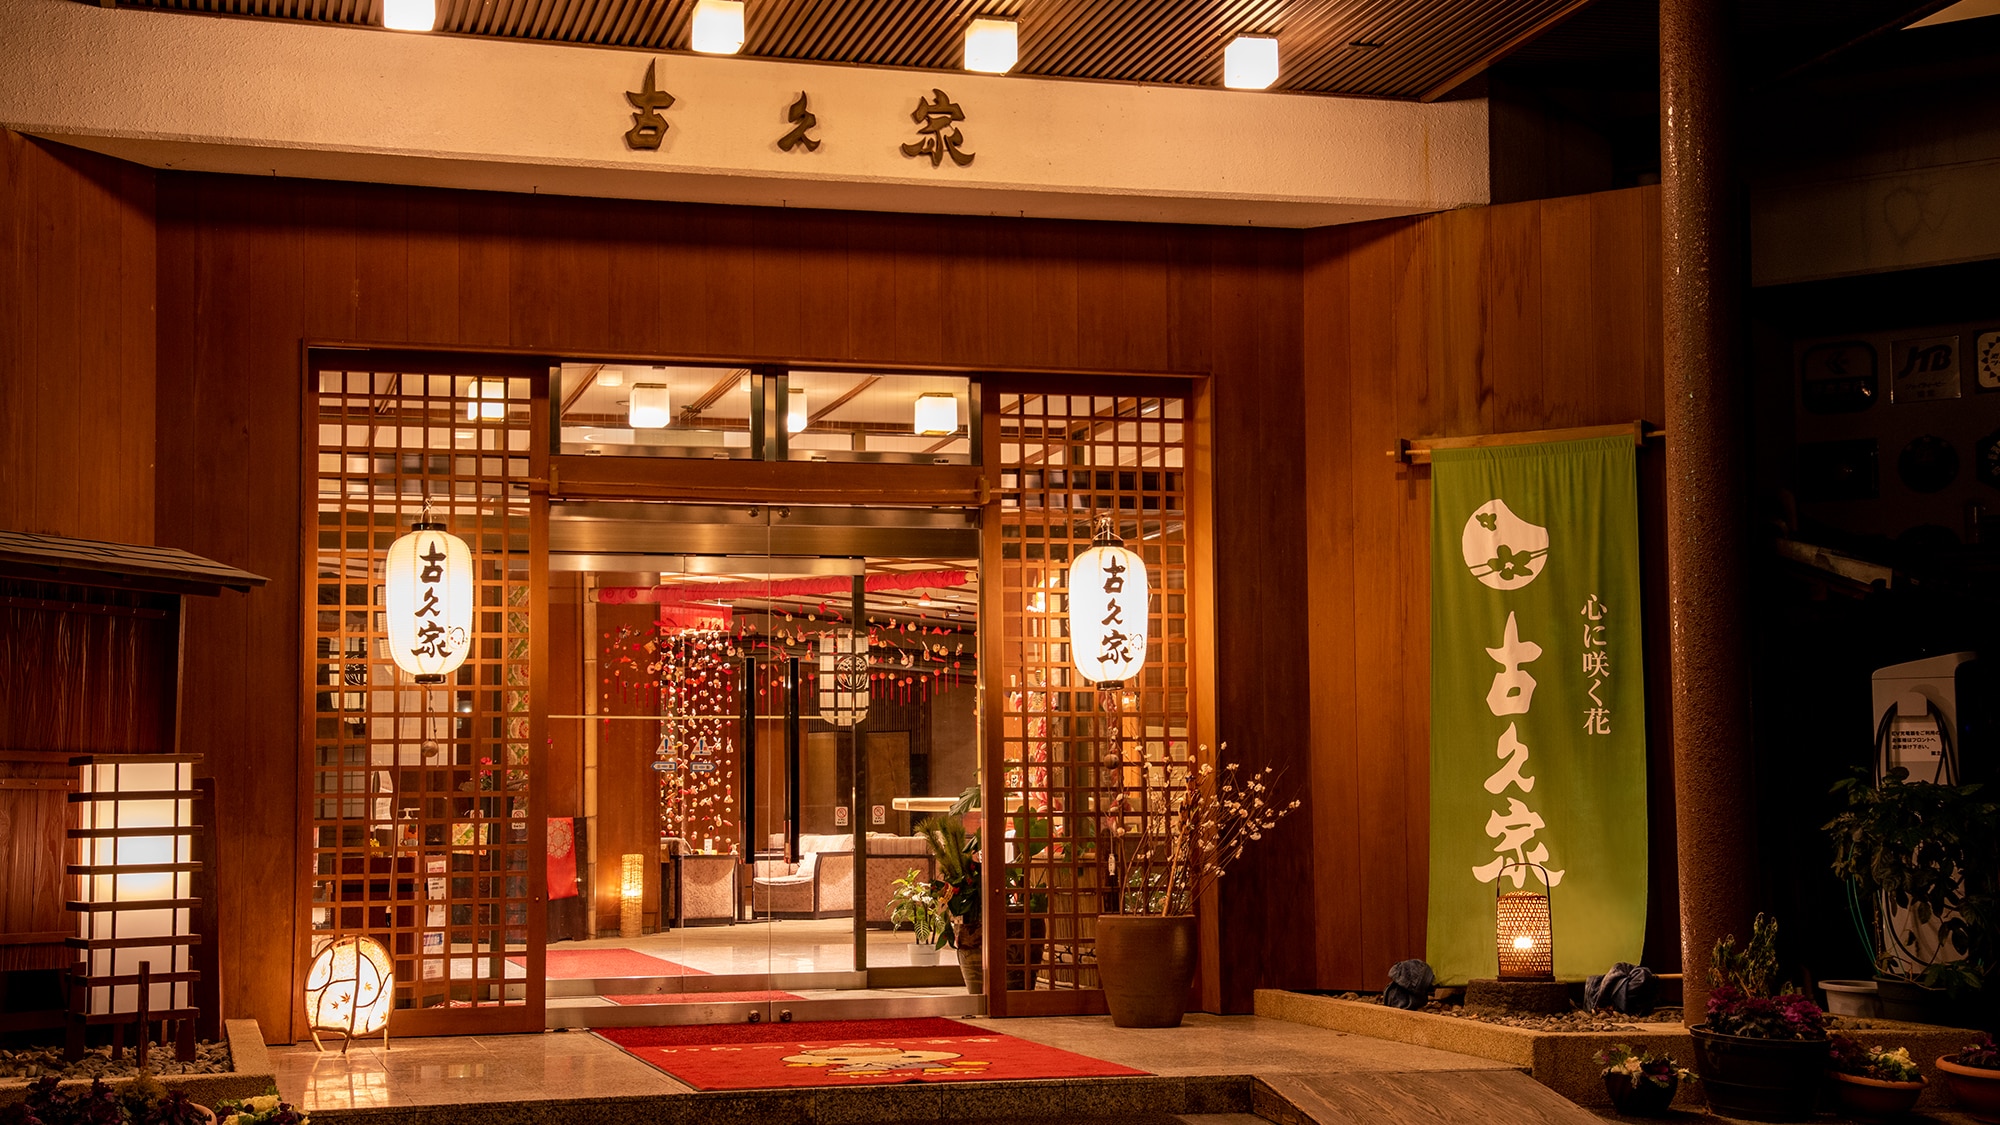 * Ikaho Onsen is a long-established inn that has been in business for 100 years.